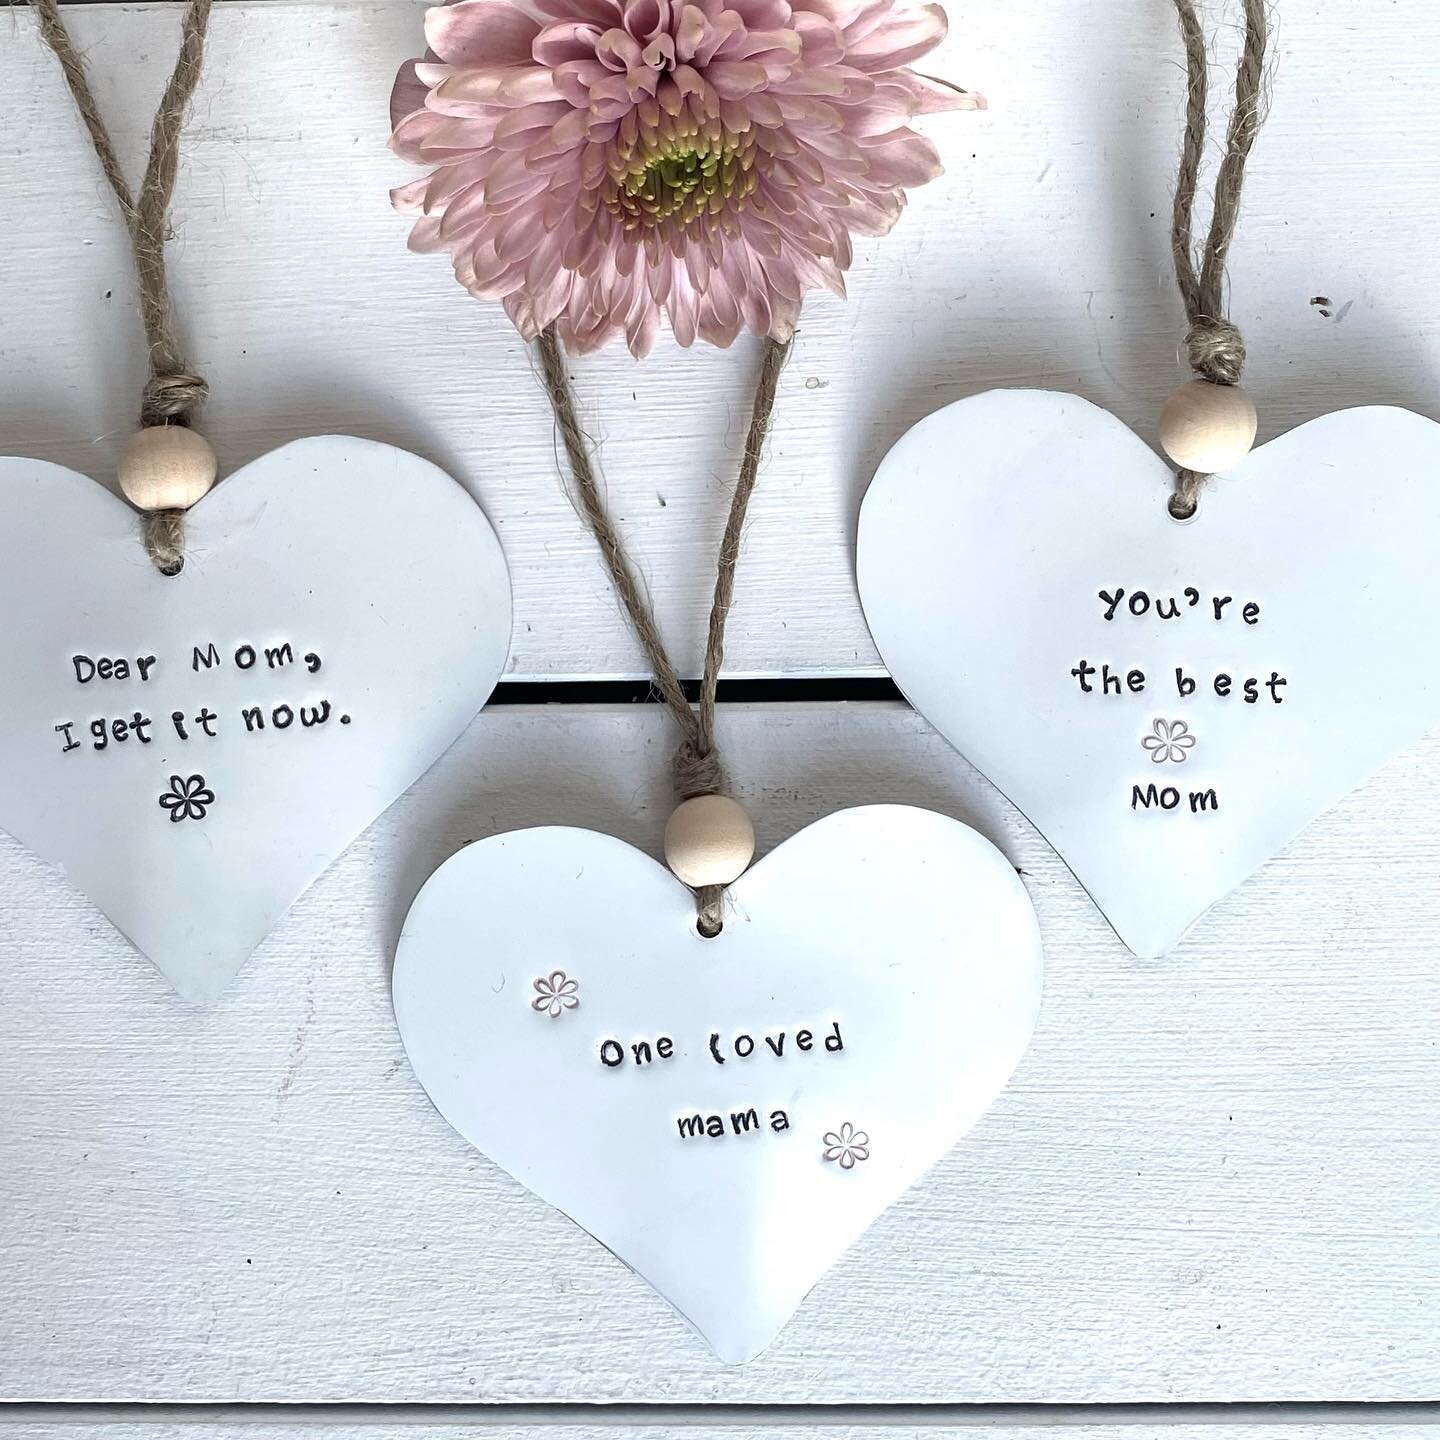 If you can&rsquo;t be together on Mother&rsquo;s Day send one of these little keepsakes in a card to remind her of how special she is to you. They are lightweight &amp; fit perfectly in an envelope. #mothersday #mothersdaygift #yegmaker#keepsakes #ti